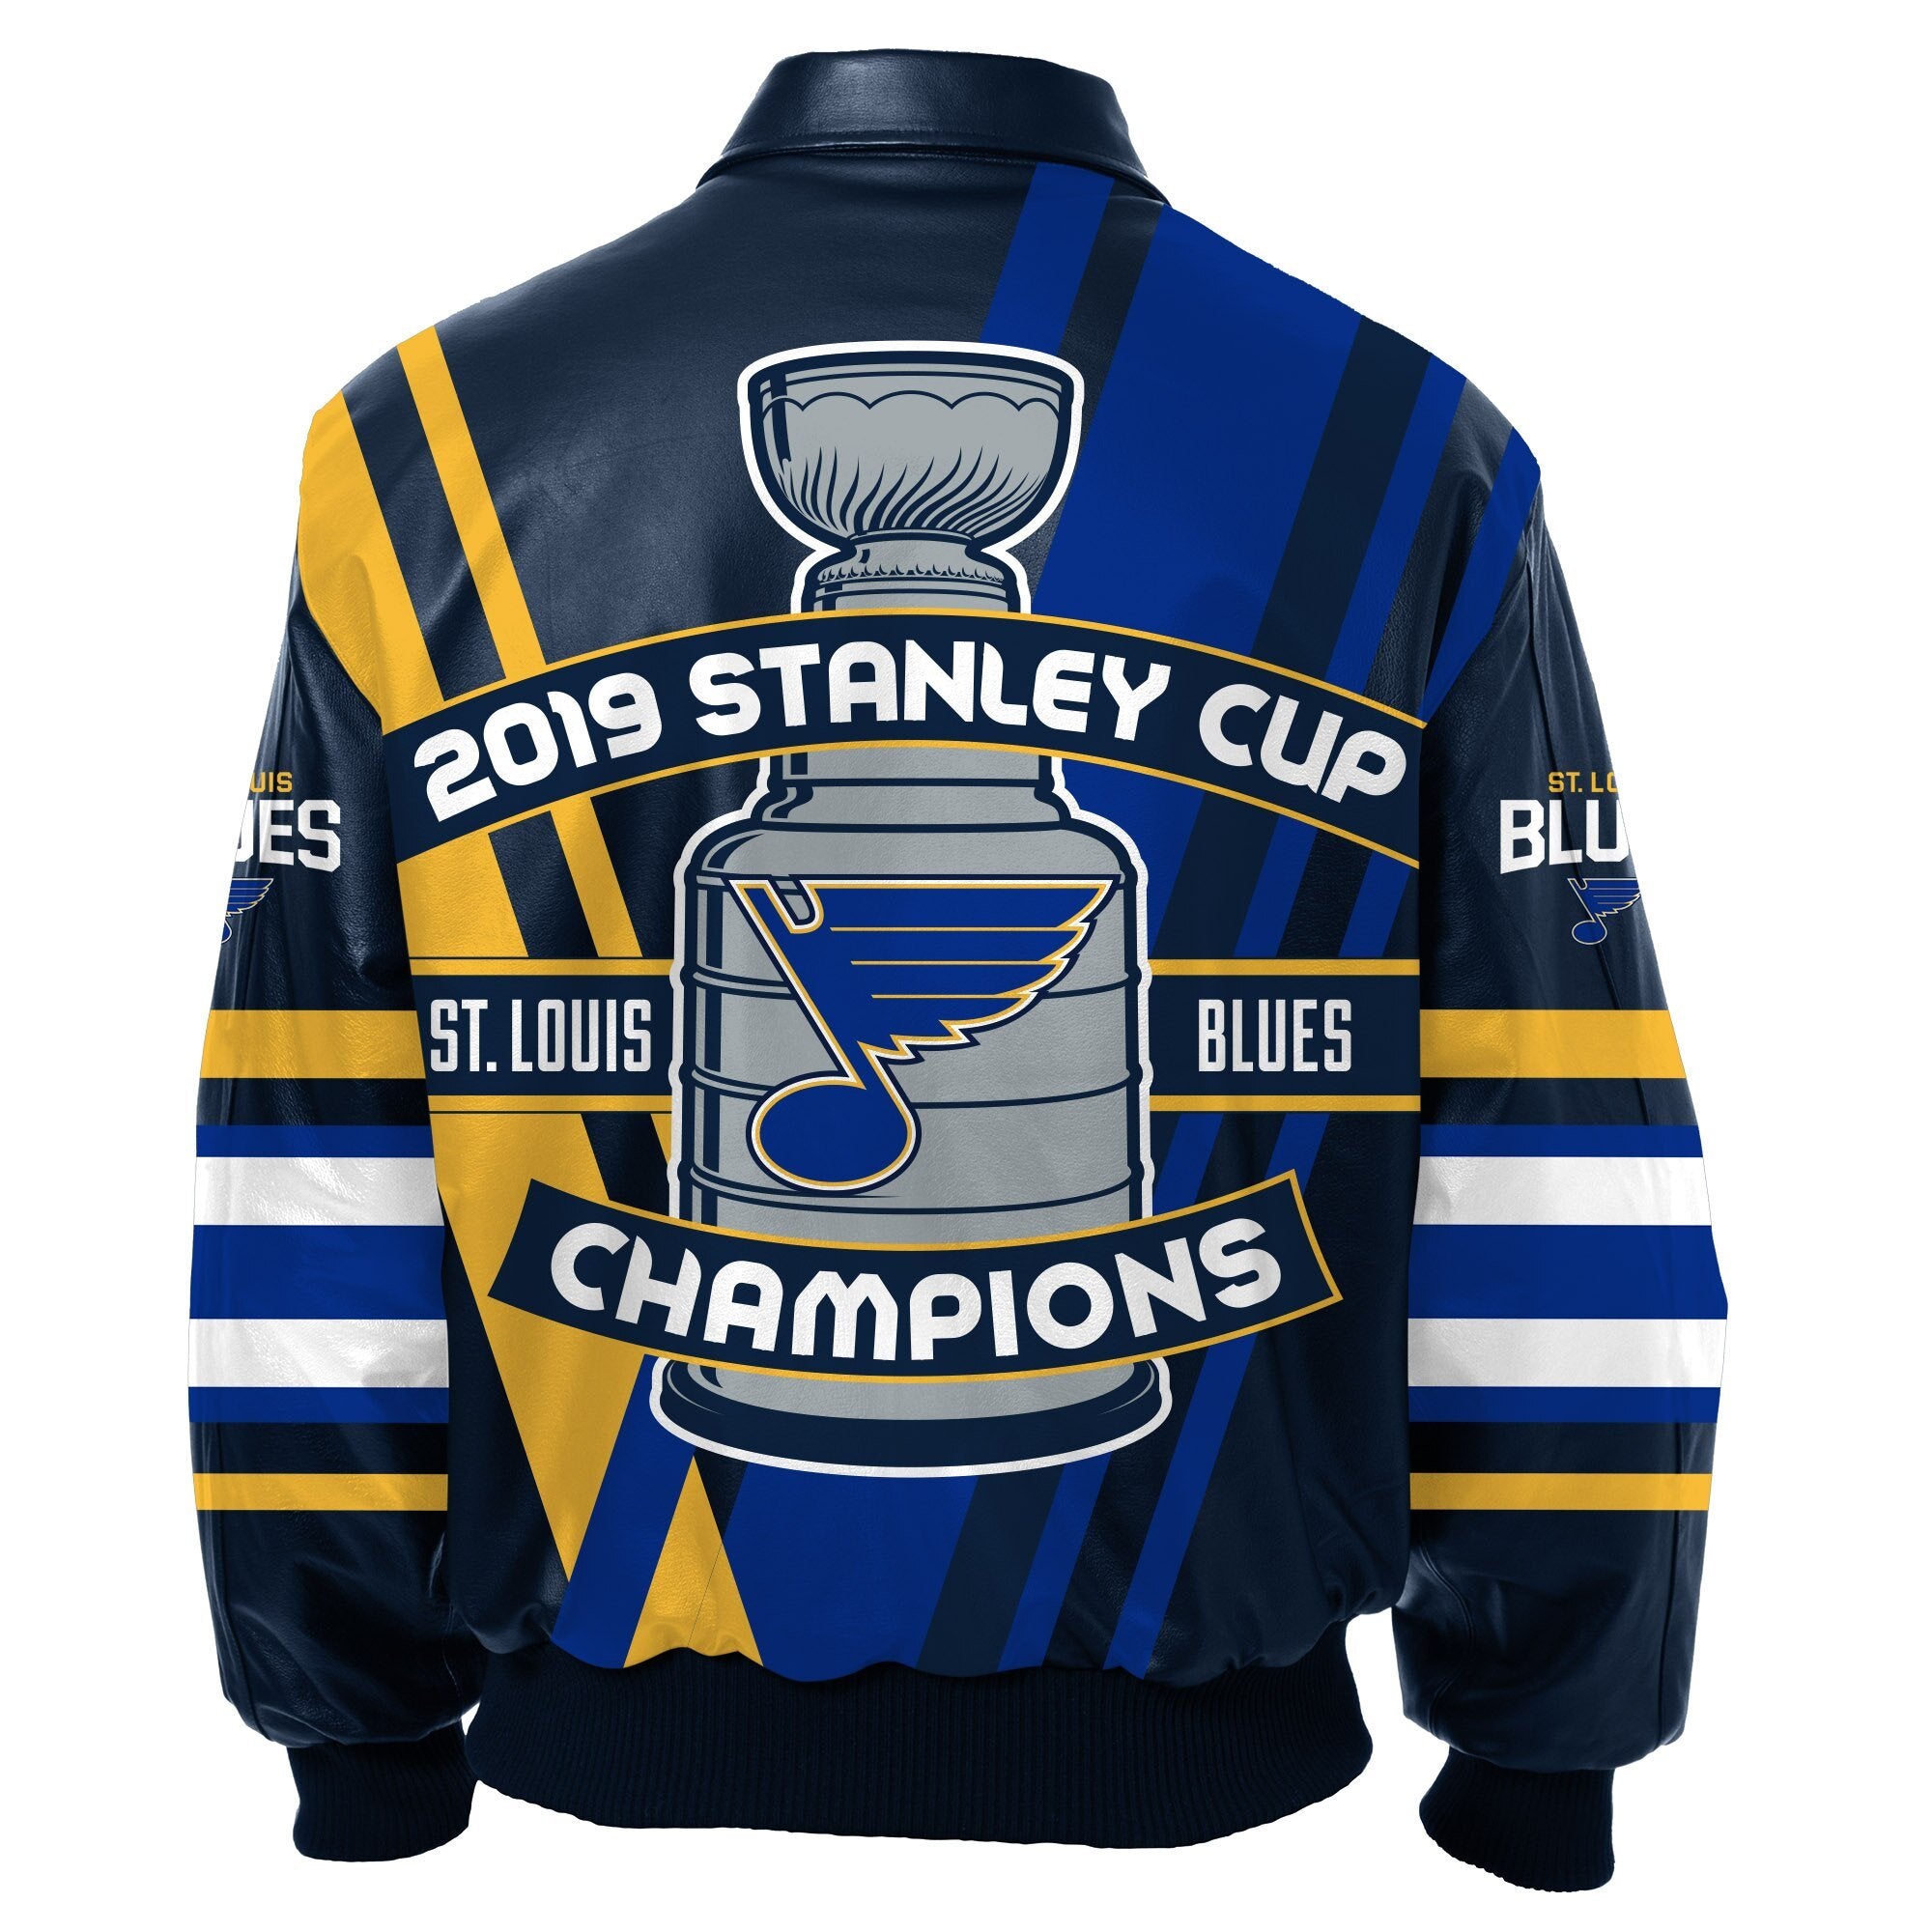 St Louis Blues Leather Jacket For Fans - Freedomdesign